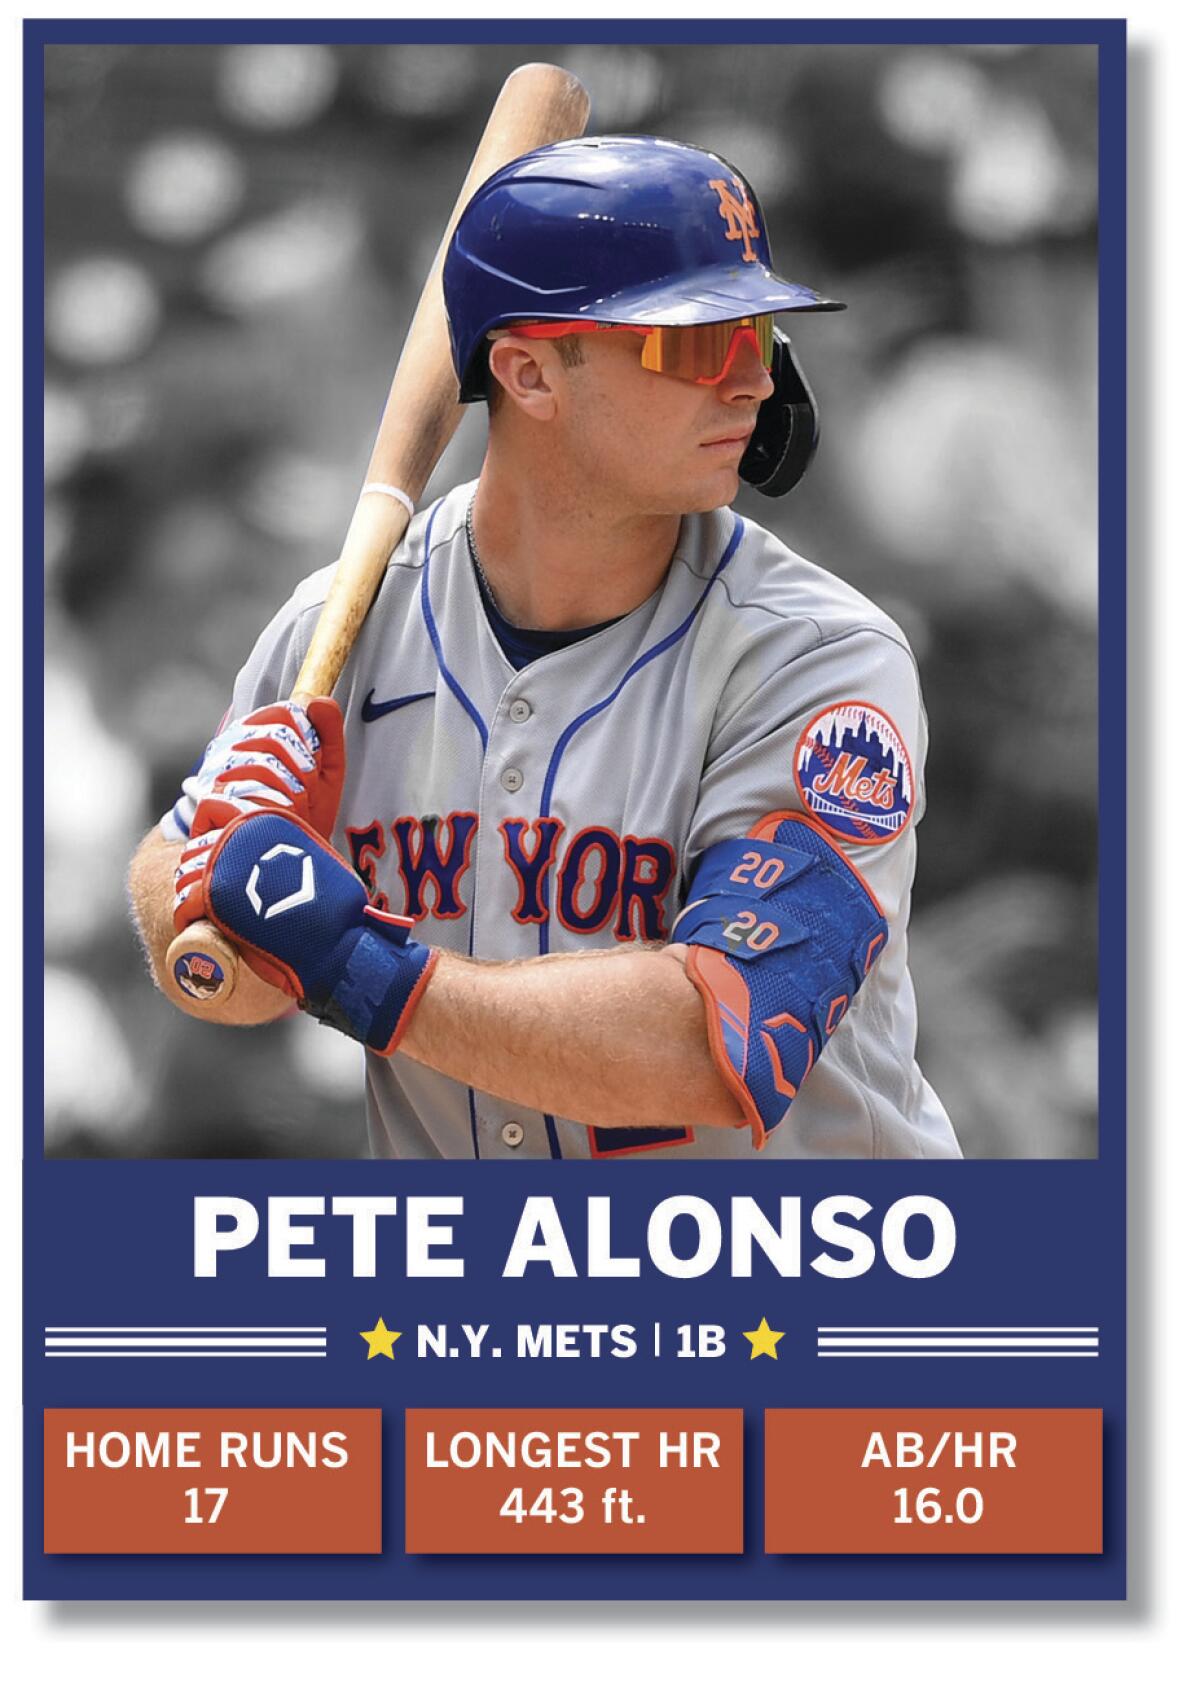 New York Mets home run derby competitor Pete Alonso.